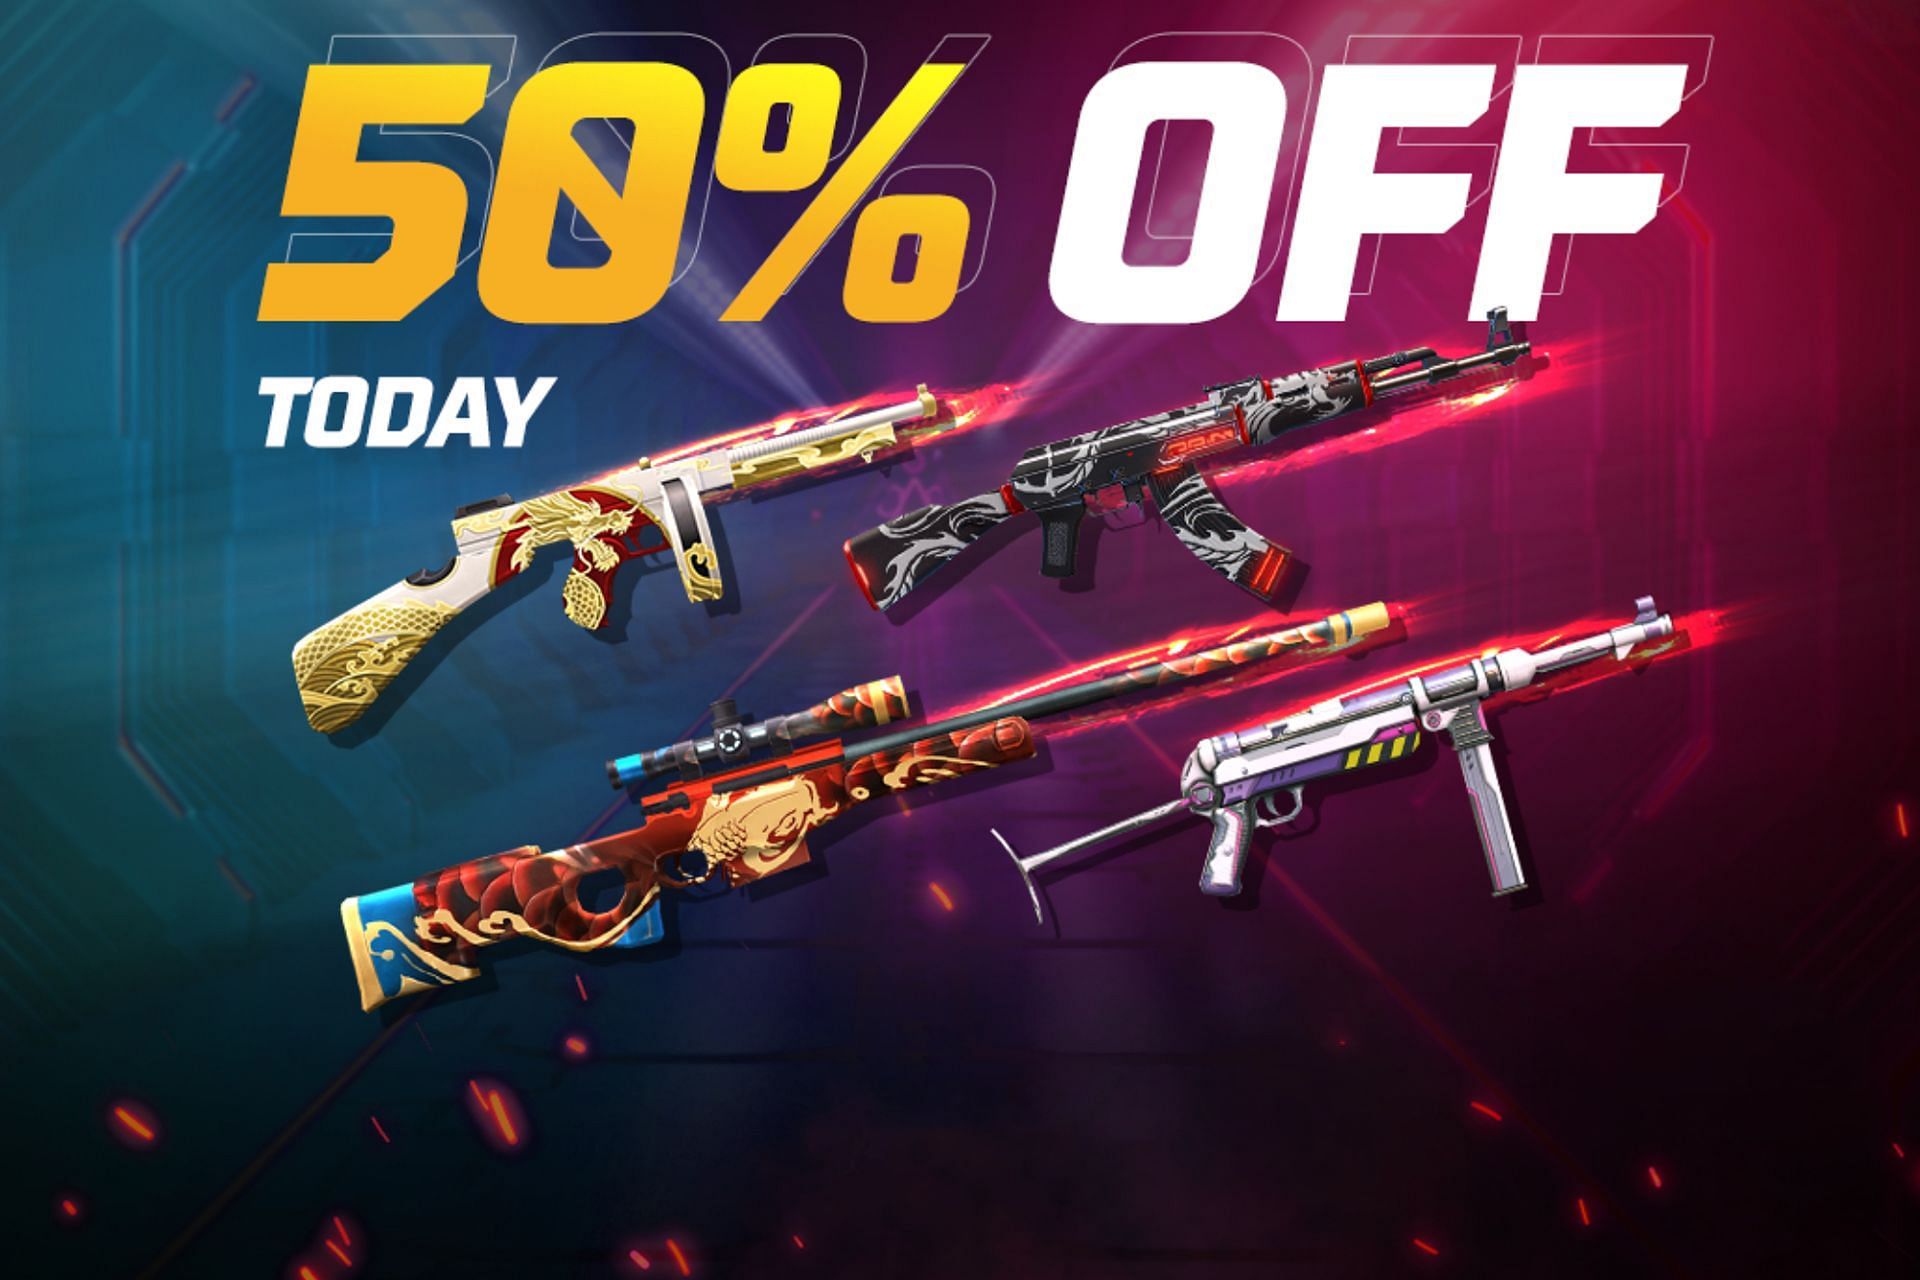 50% discount is only available today (Image via Garena)